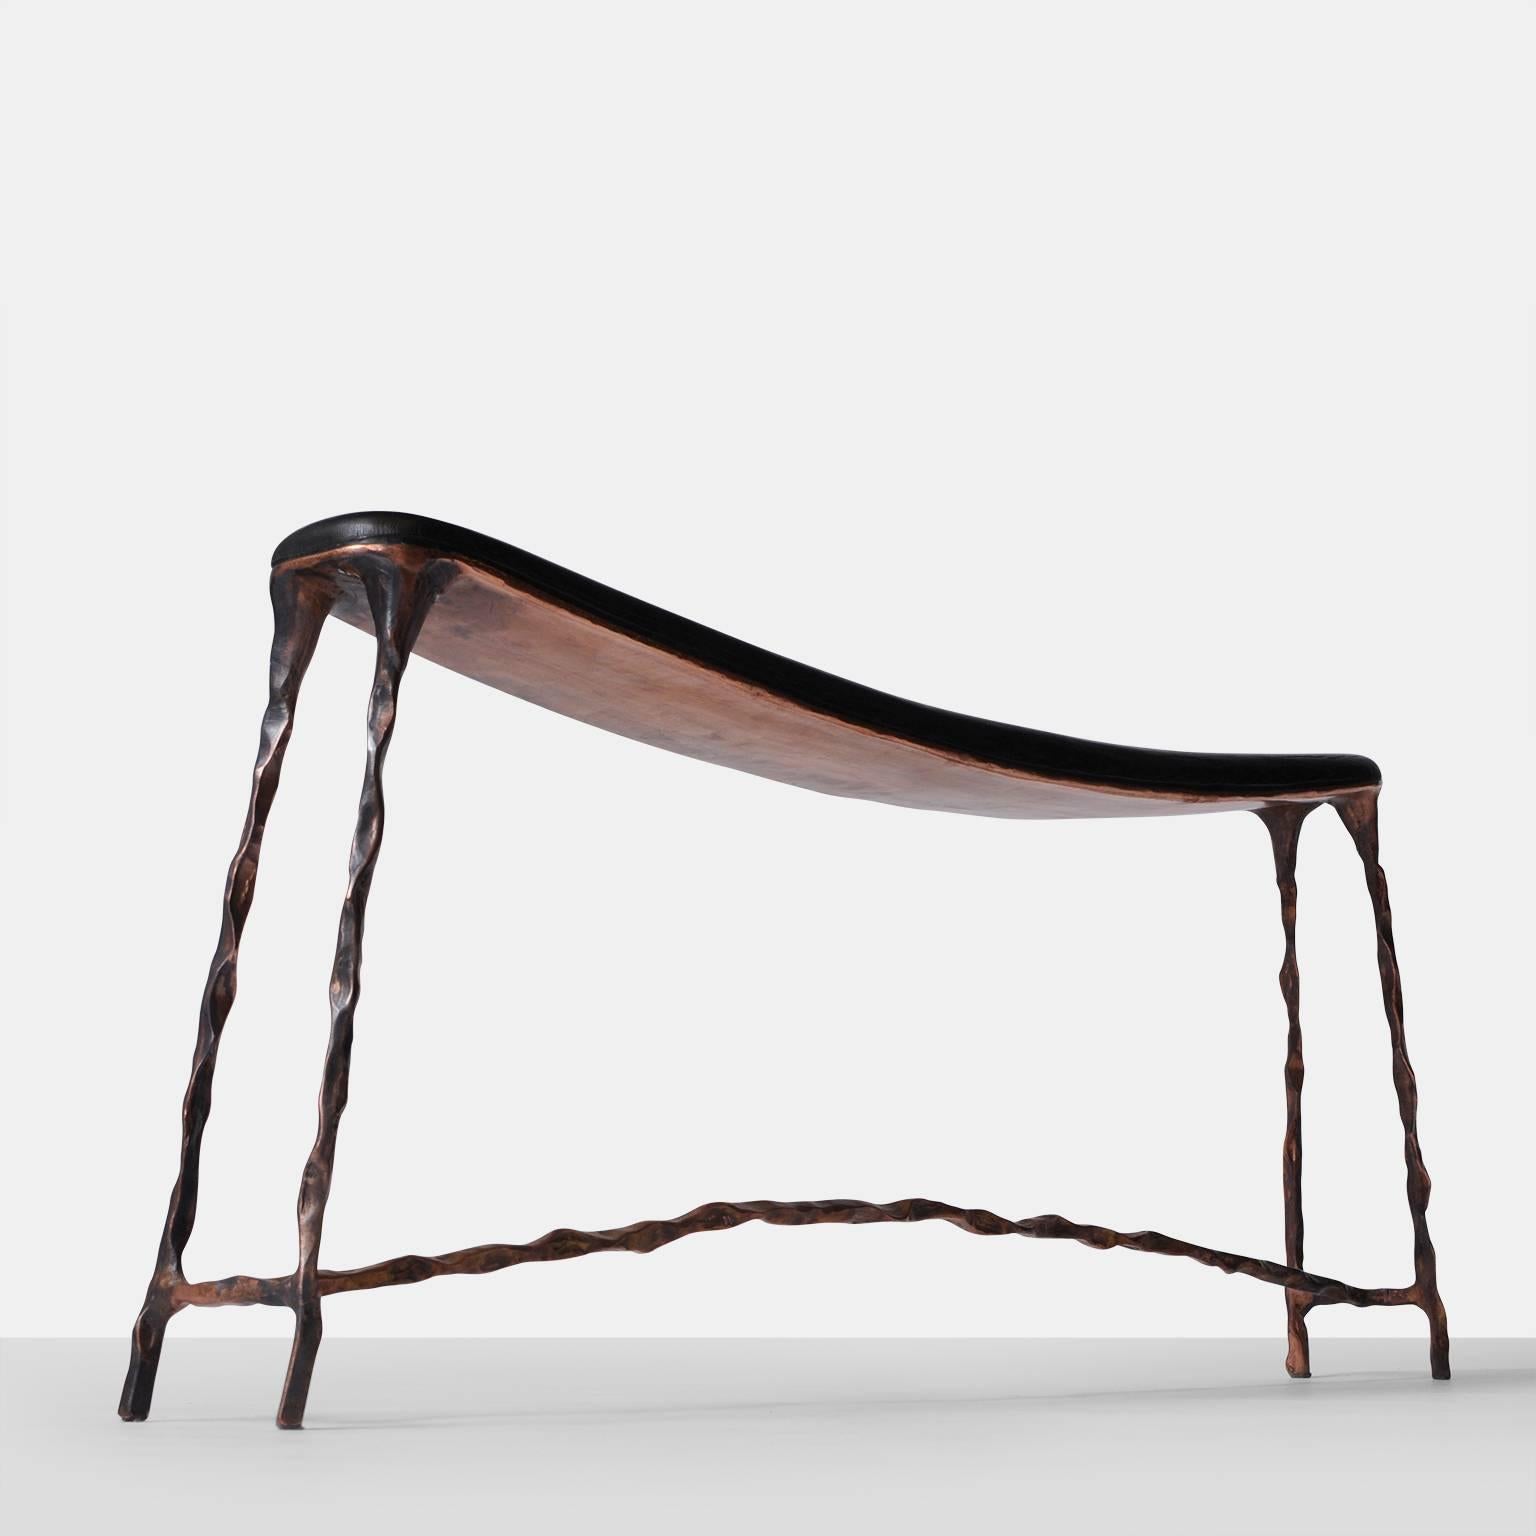 A small-scale bench with a bended and blackened oak top and a base of hand-forged copper. Each piece is completely handmade by Valentin Loellmann and all are a limited edition, signed and numbered. Almond & Company is the exclusive gallery